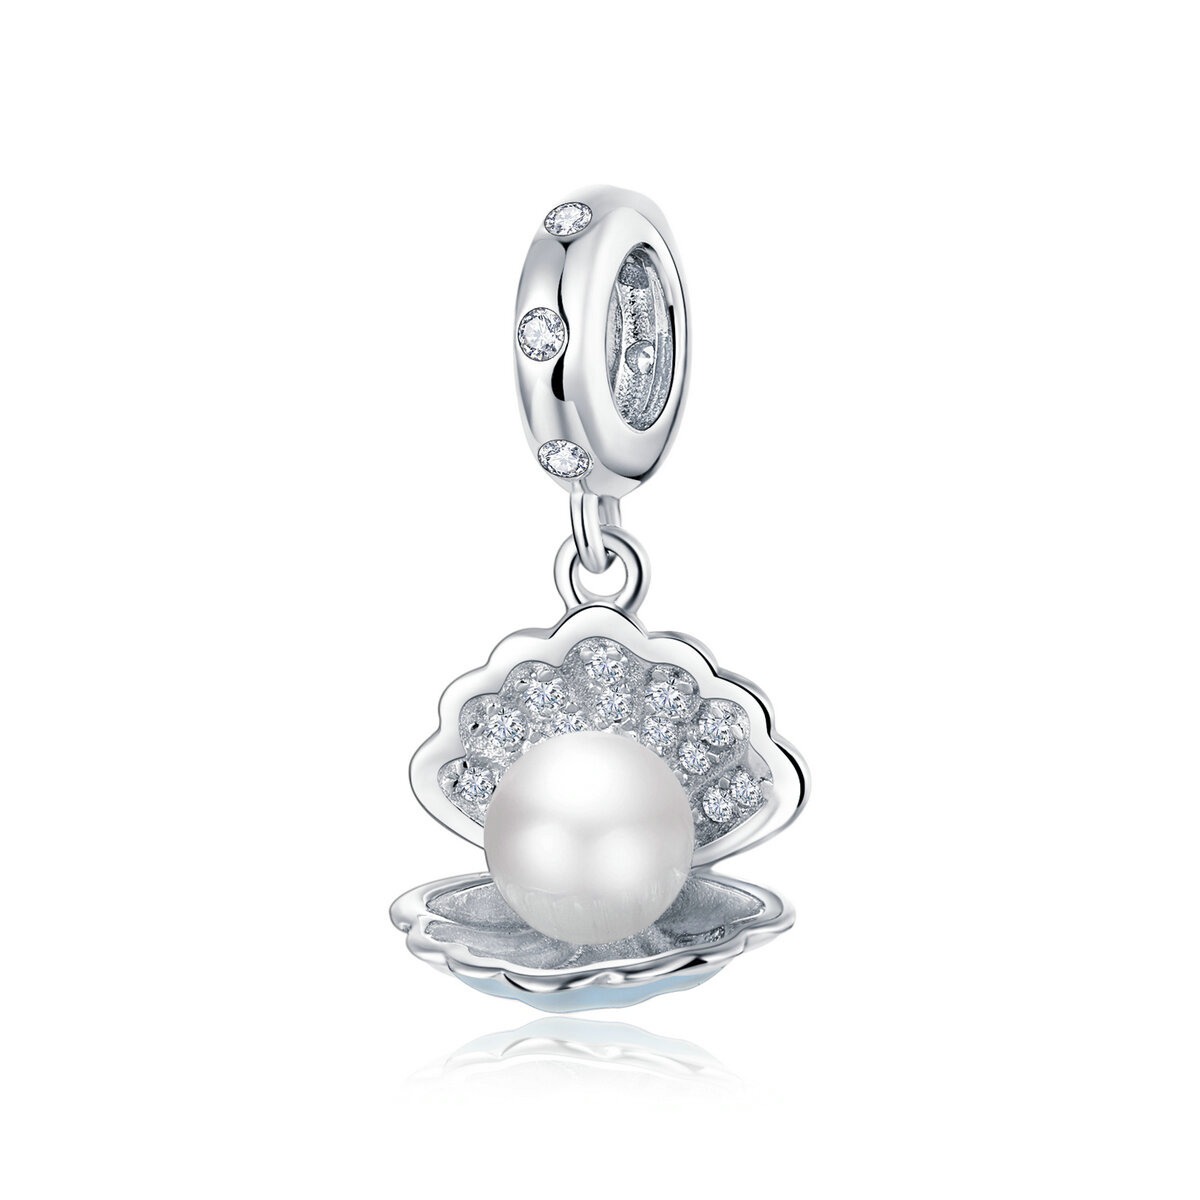 GemKing BSC242 Legend of the sea S925 Sterling Silver Charm